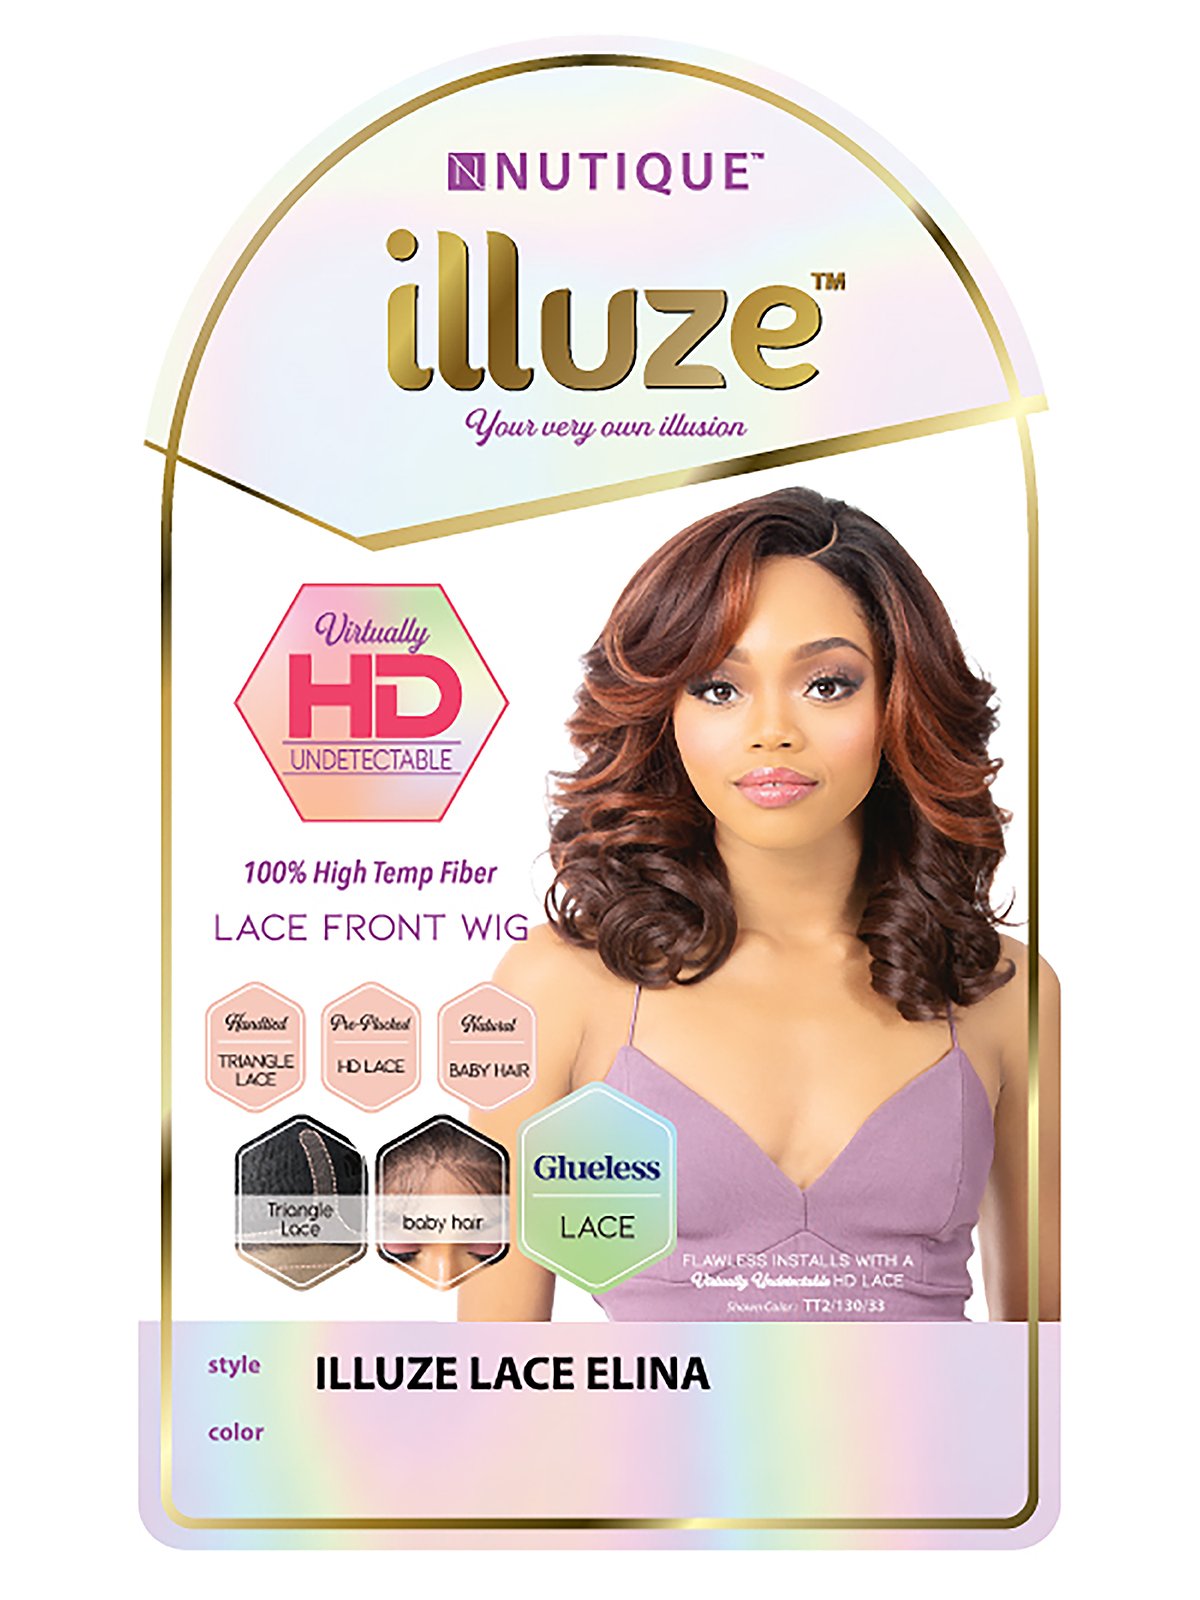 It's a Wig - Nutique Illuze HD lace Front Wig Synthetic Hair ELINA